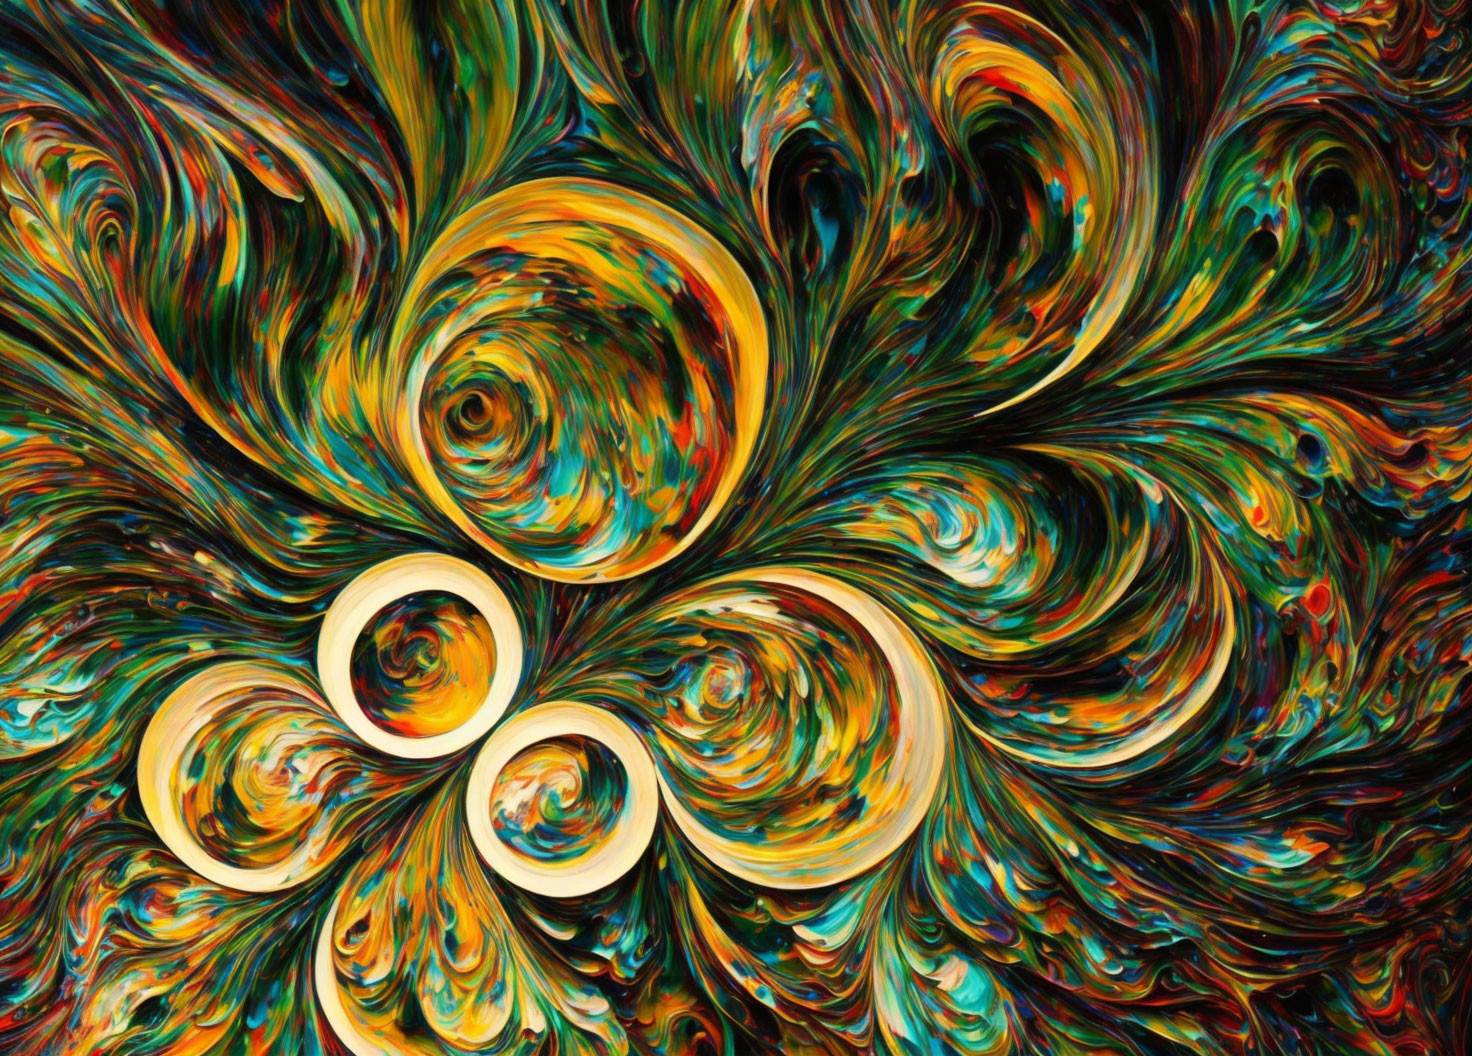 Colorful Abstract Swirl with Fractal-Like Psychedelic Pattern